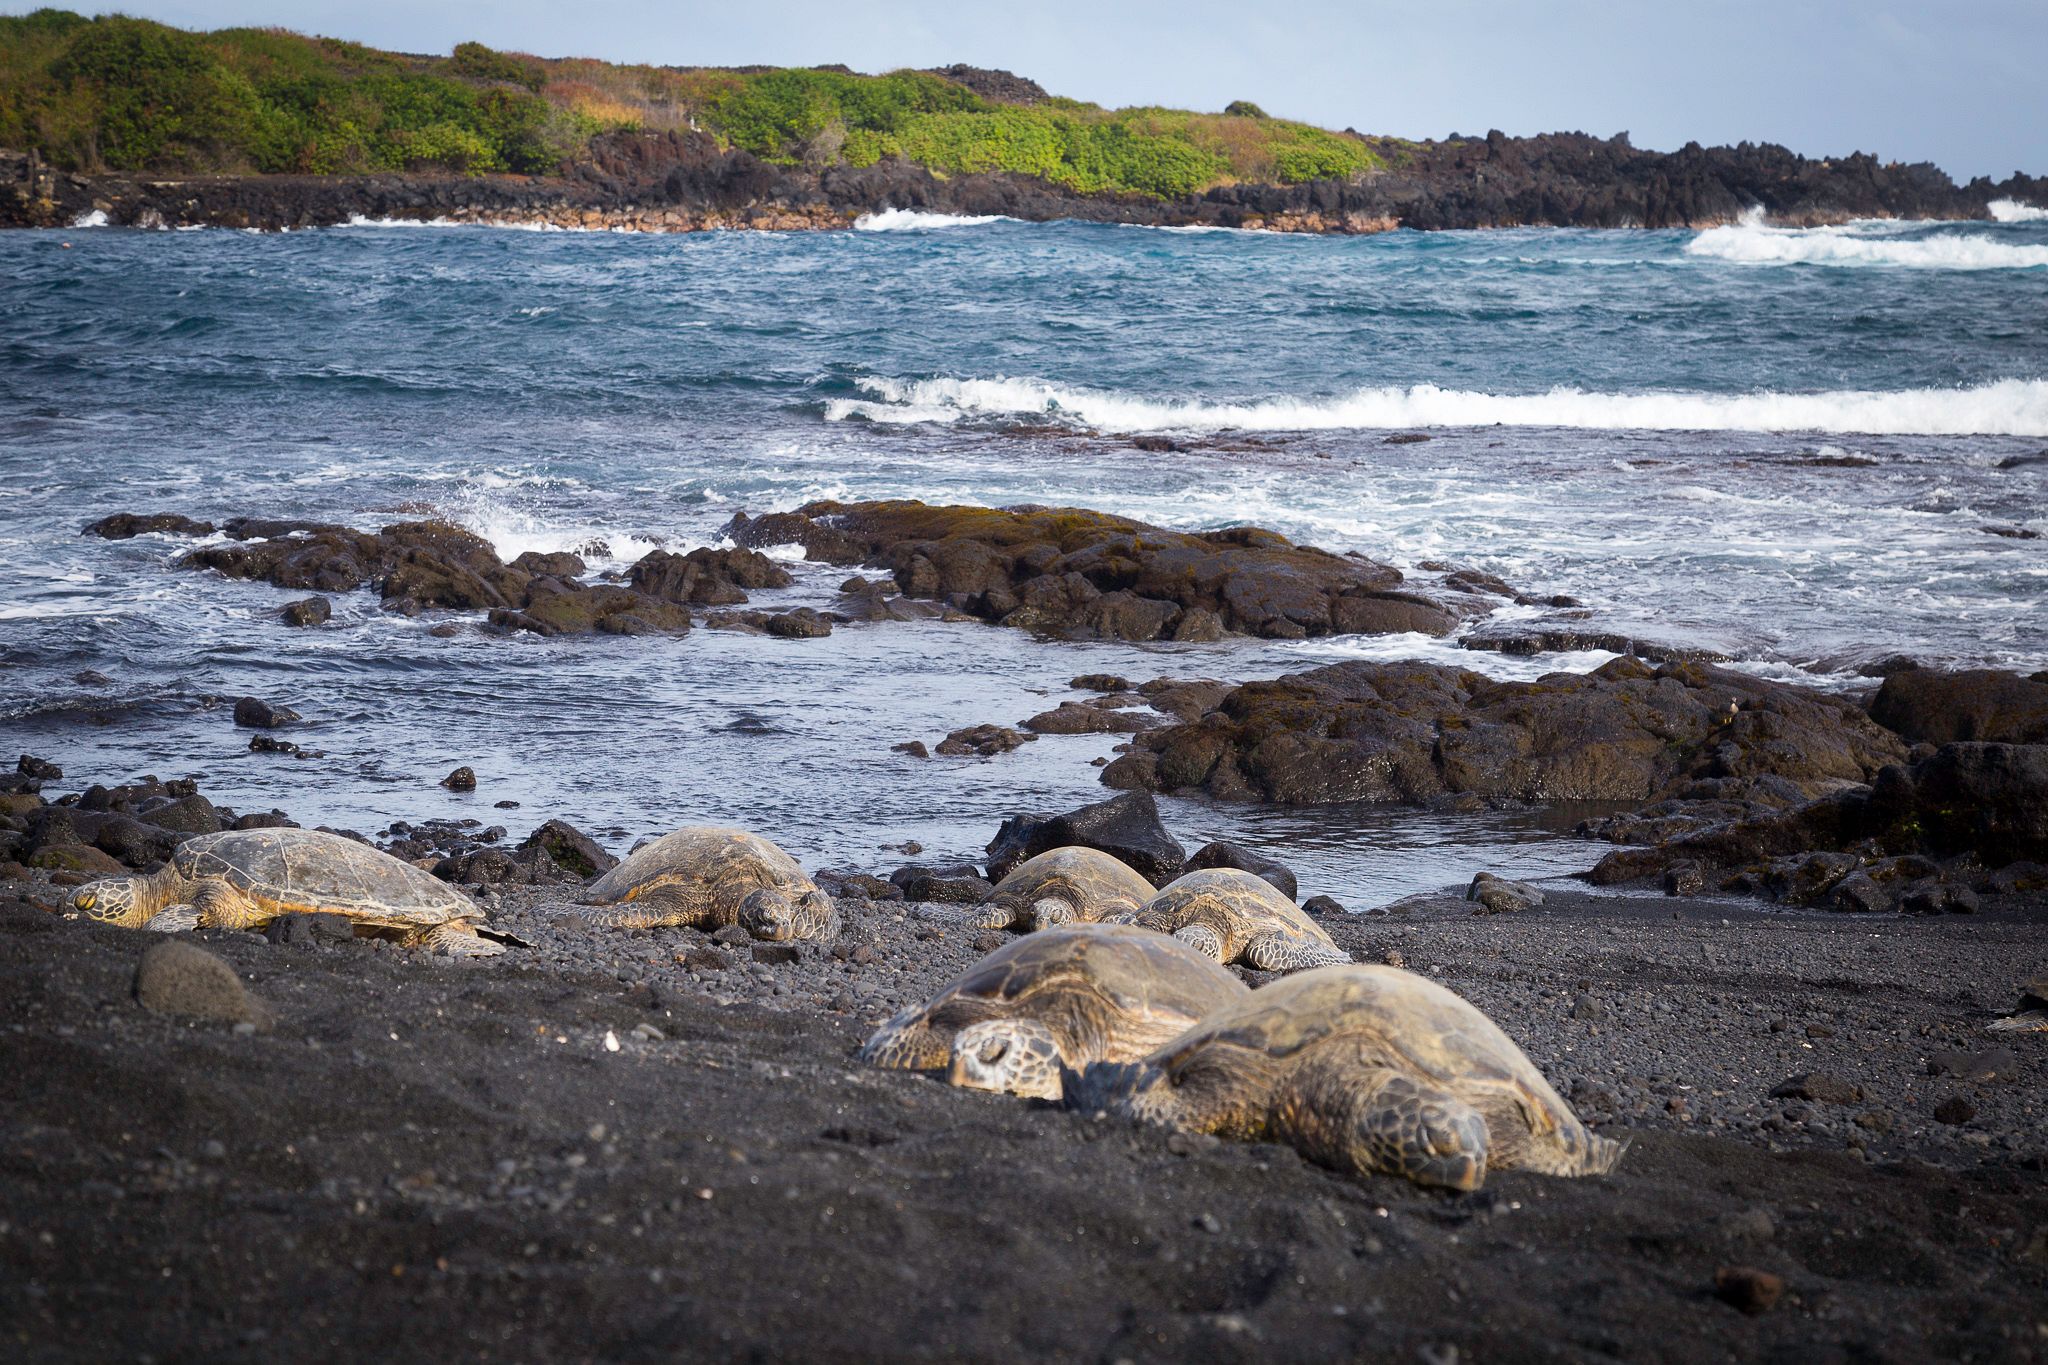 Turtles lounging at black sand beach with ocean in the background.